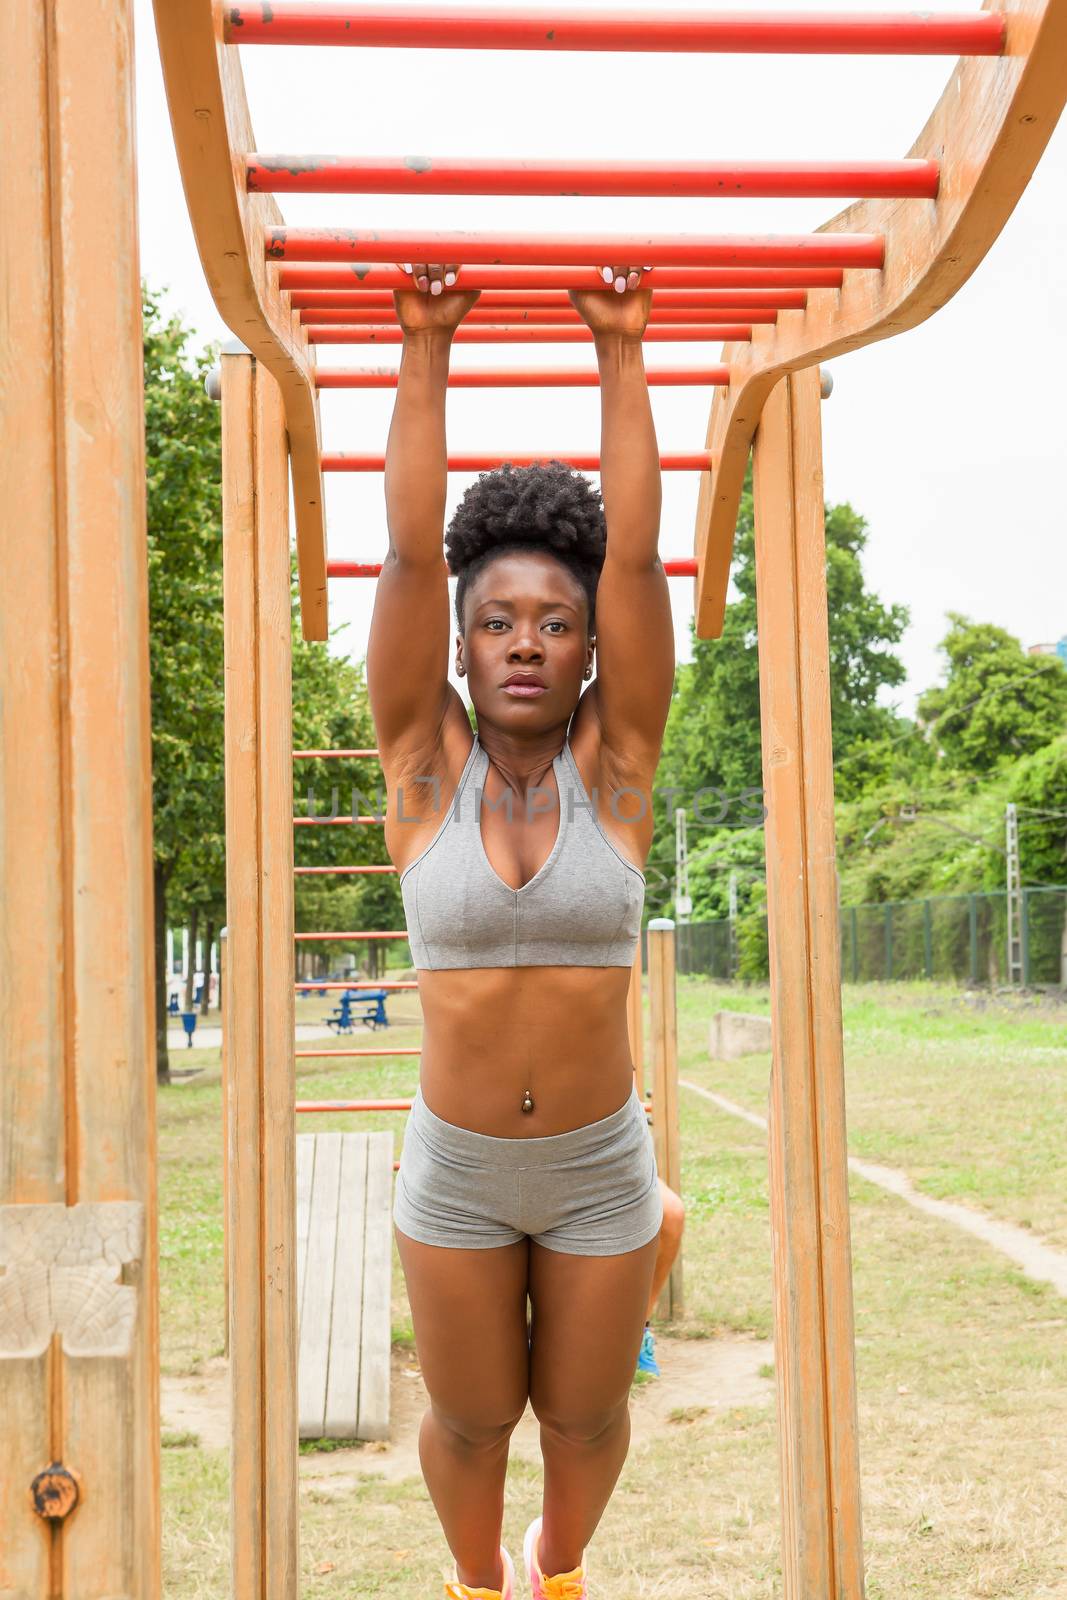 African young woman doing stretching exercises in urban structures for sports in a city park